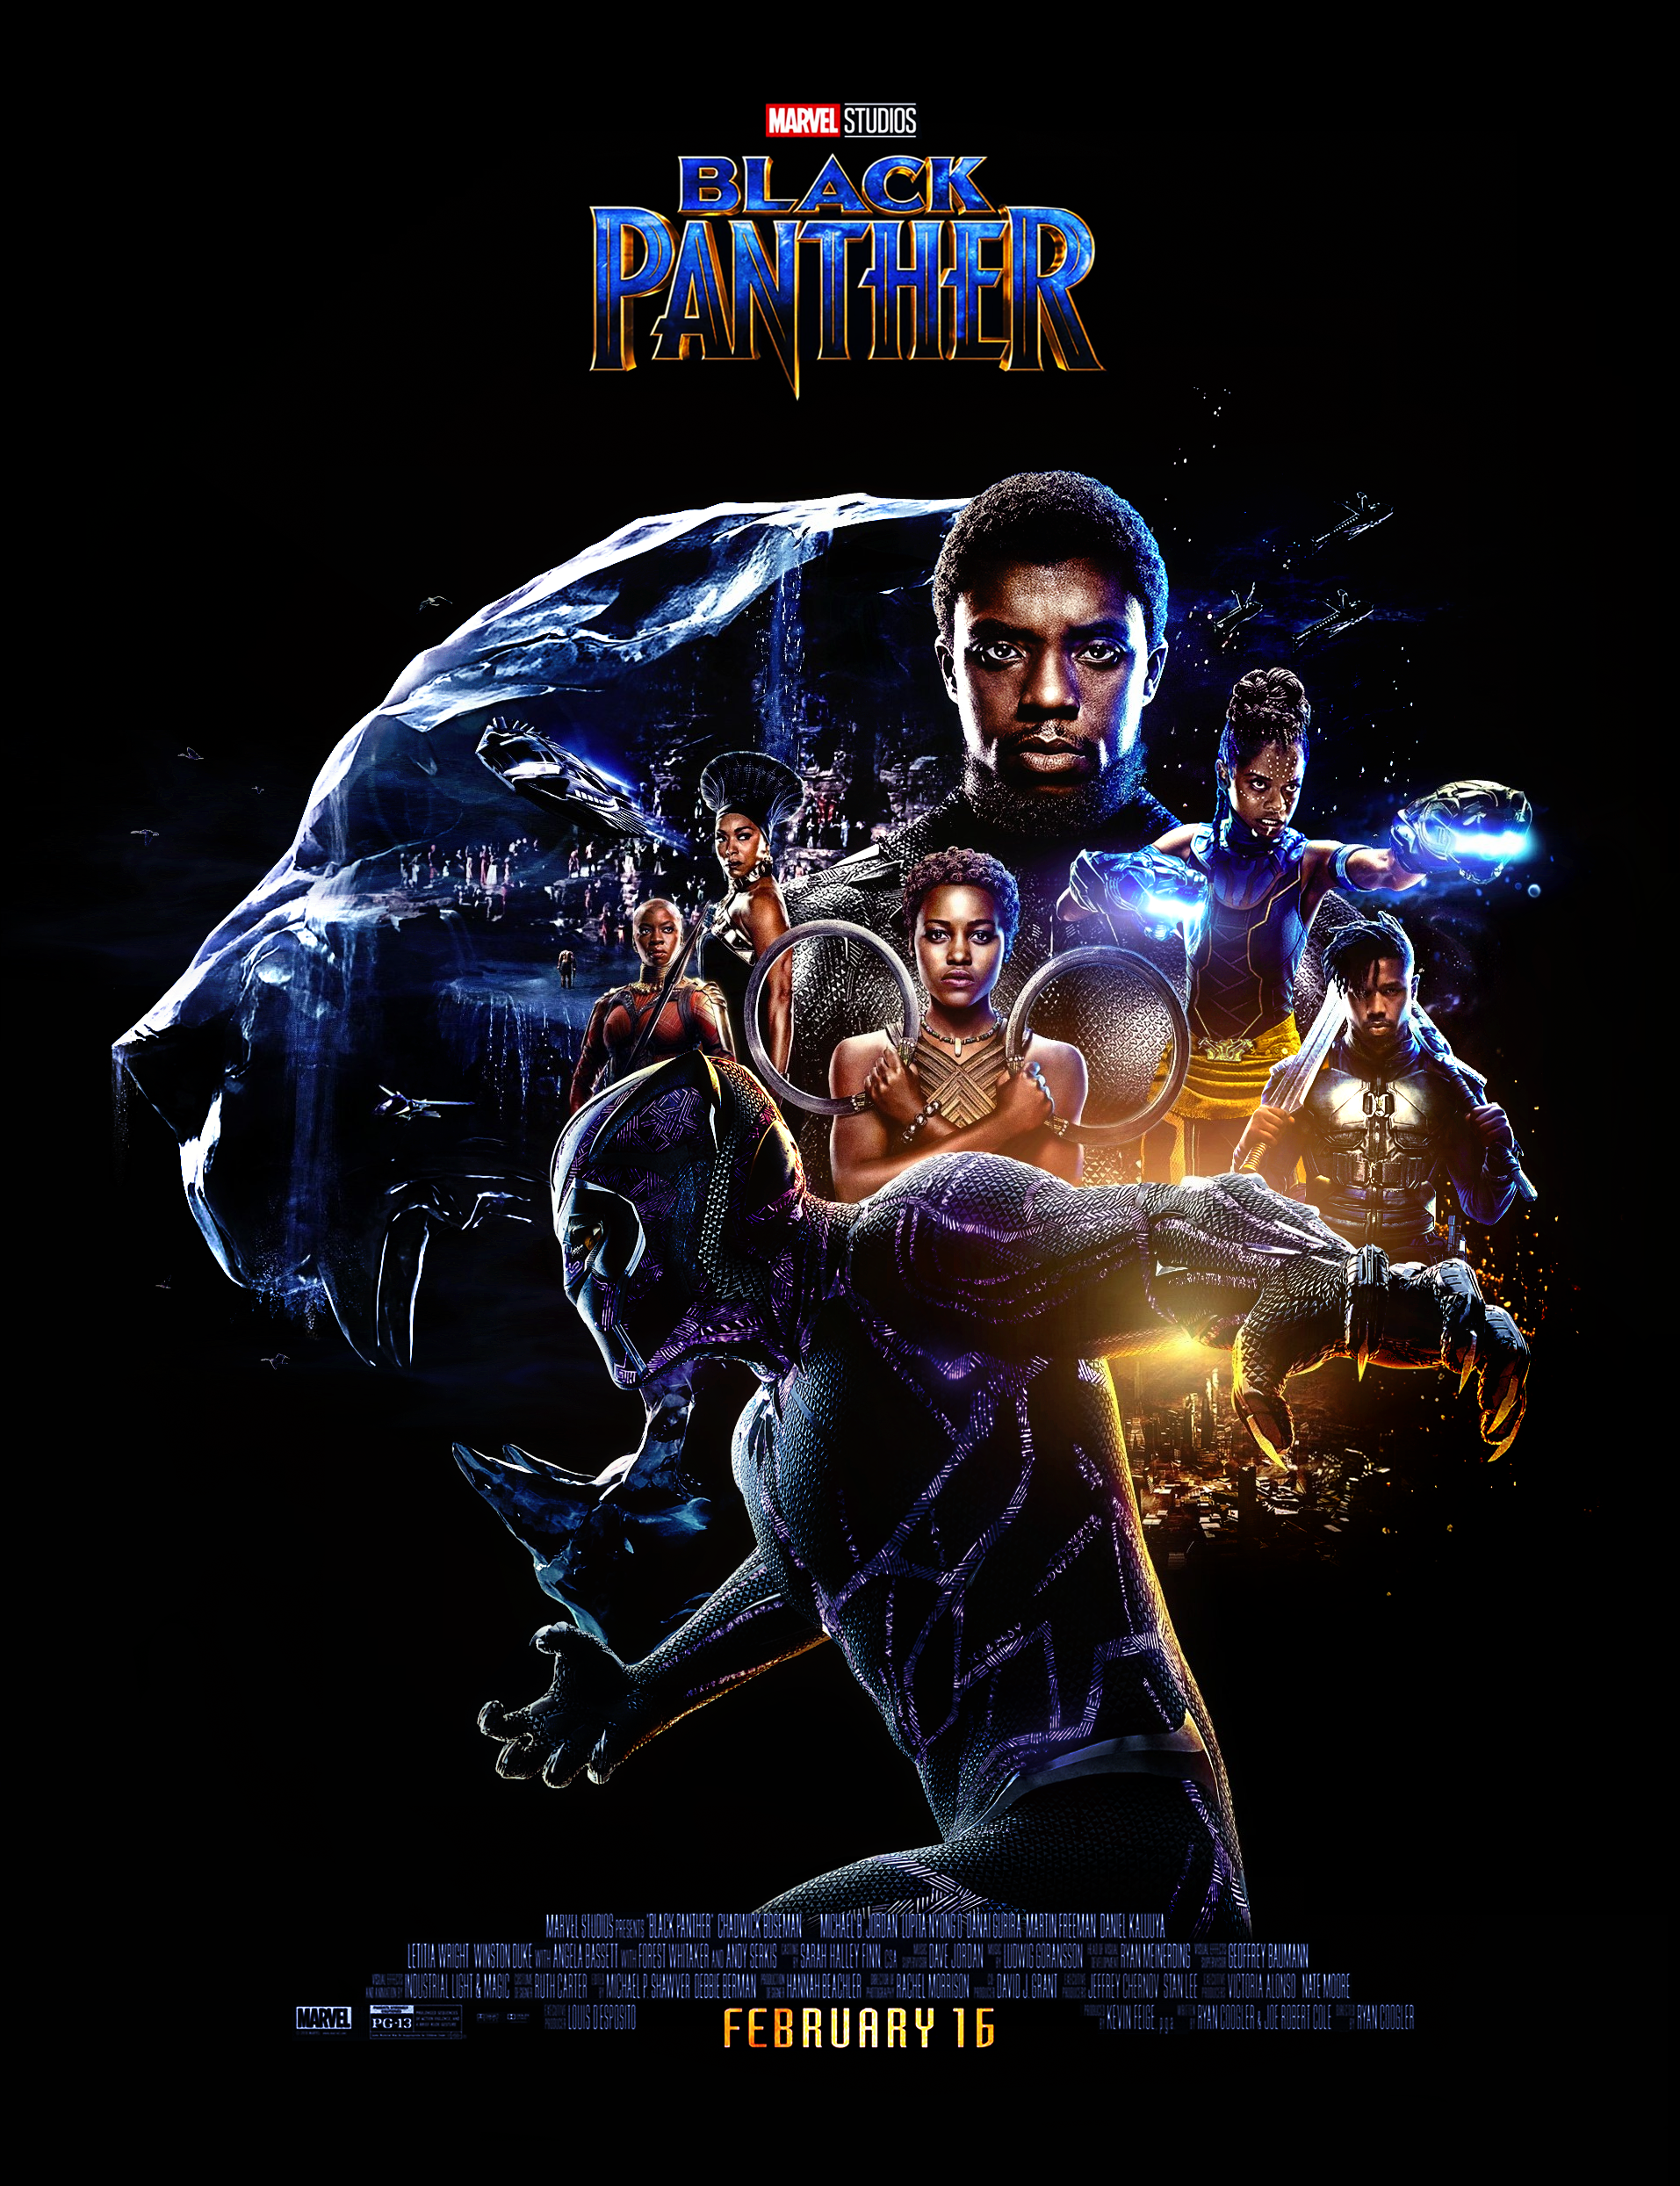  Black  Panther  2022 Poster  2 by CAMW1N on DeviantArt